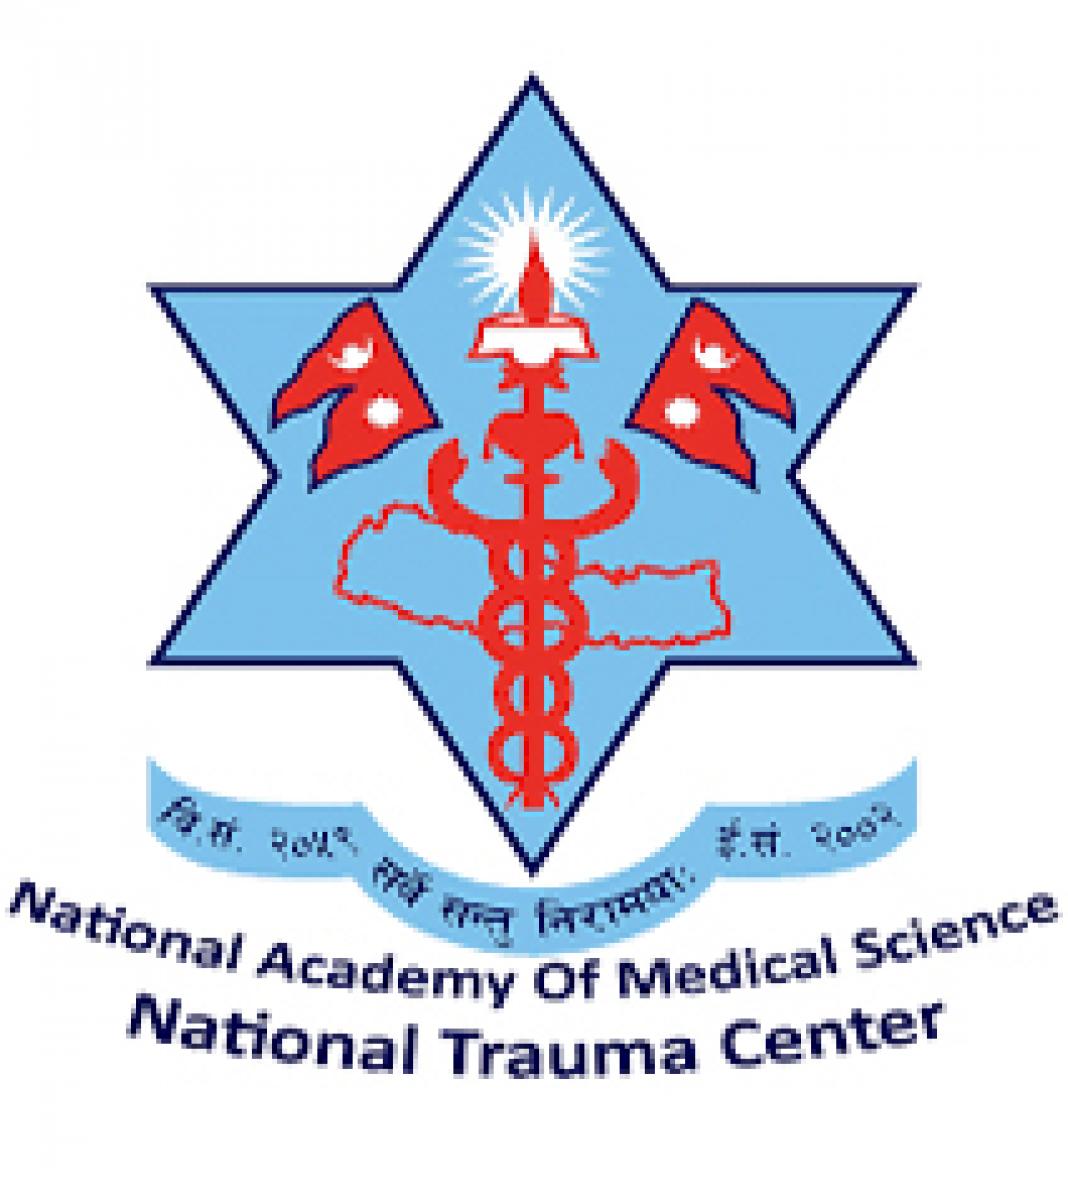 National Academy of Medical Sciences